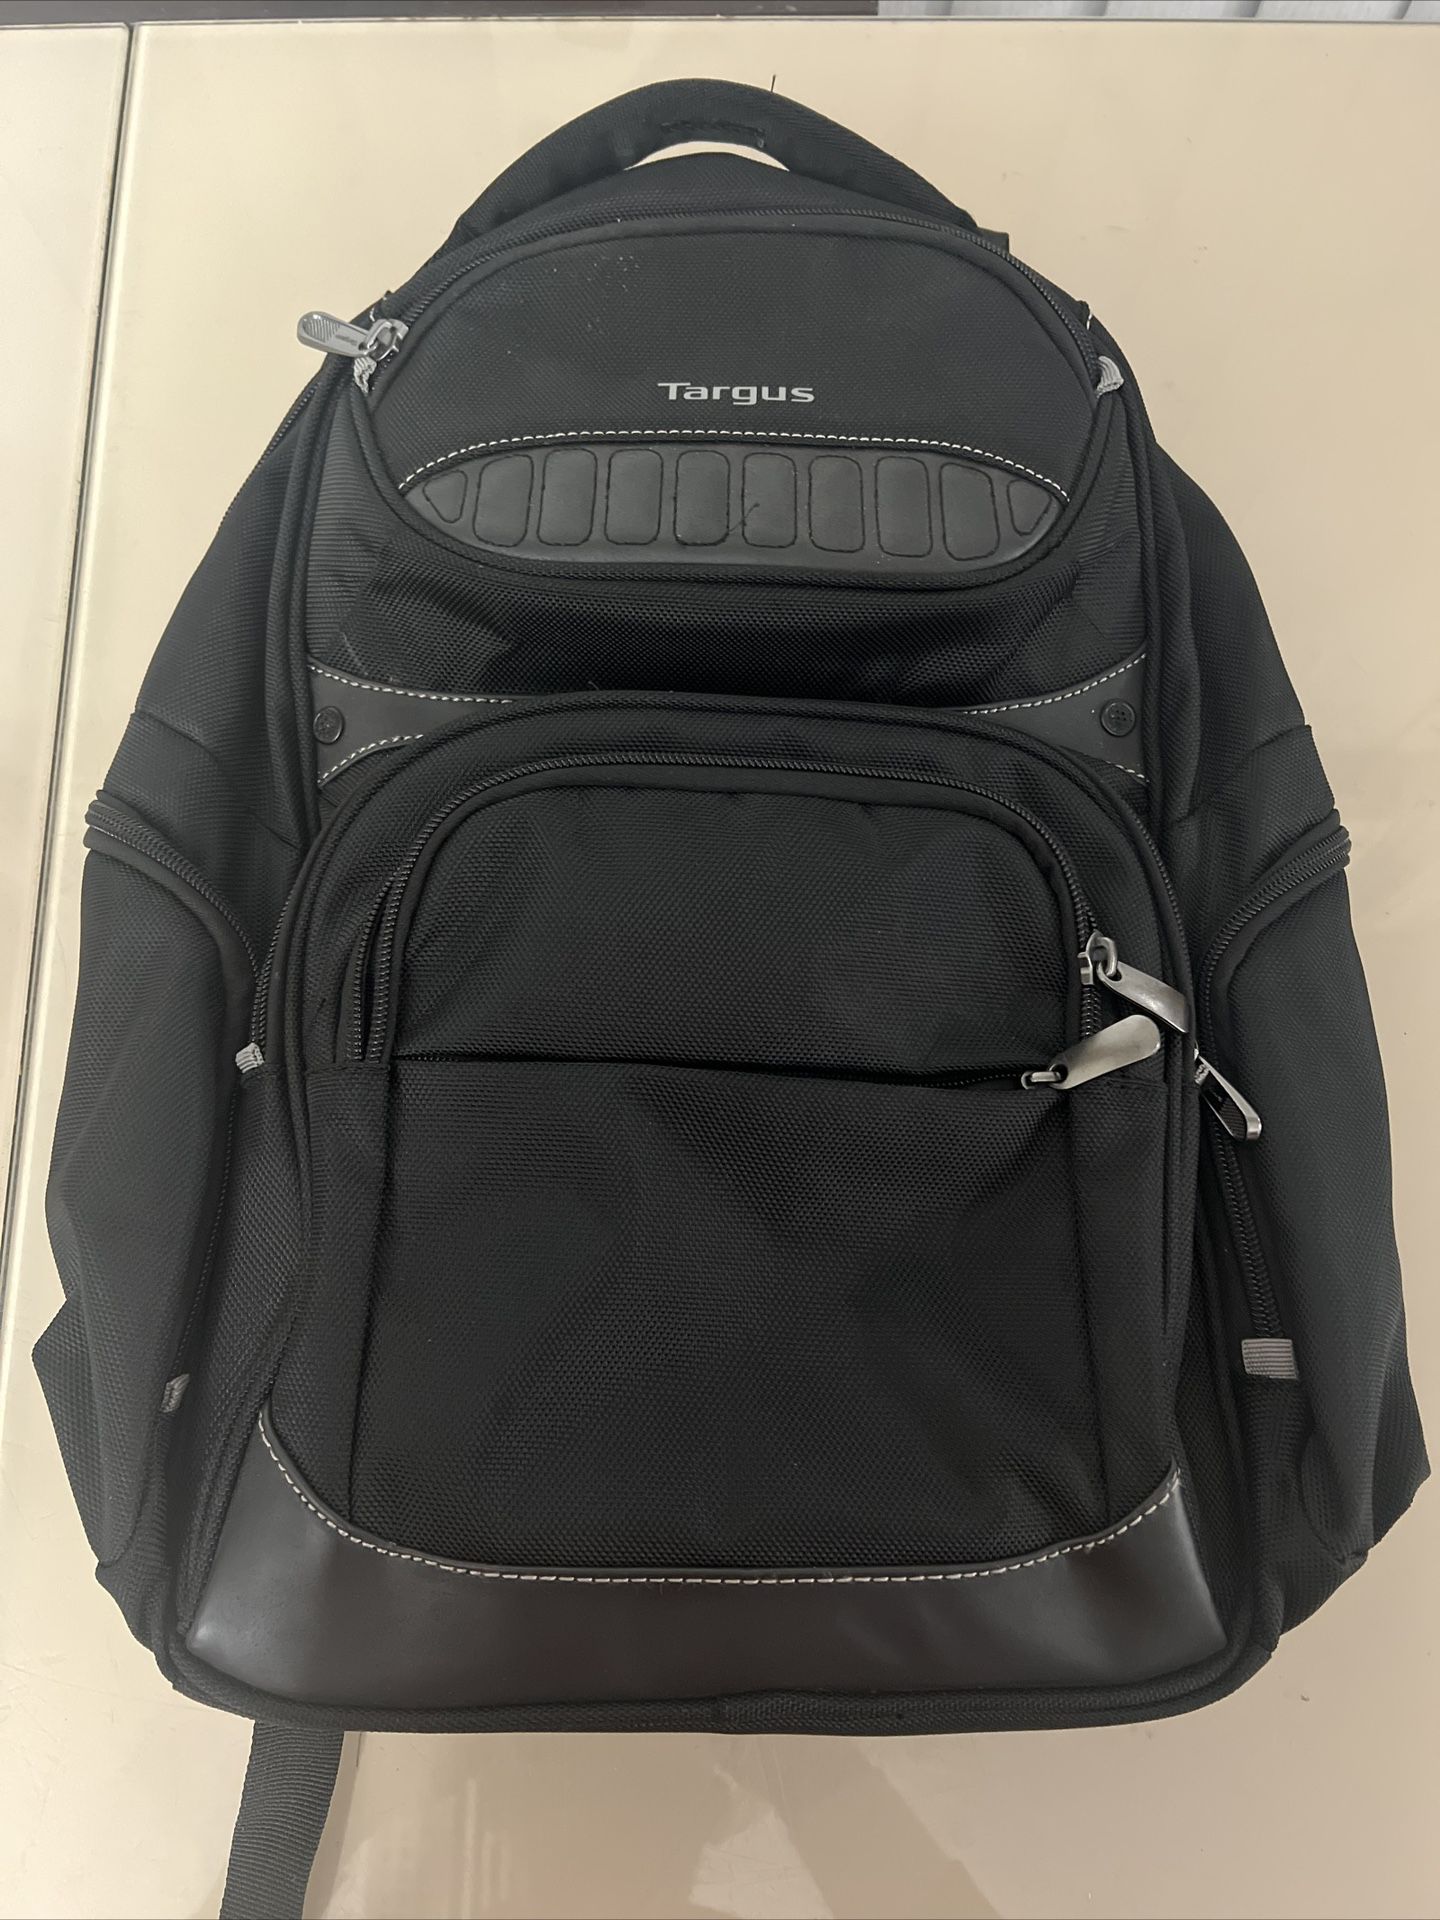 Targus Legend IQ Backpack Laptop bag for Business Professional and College. Very good condition